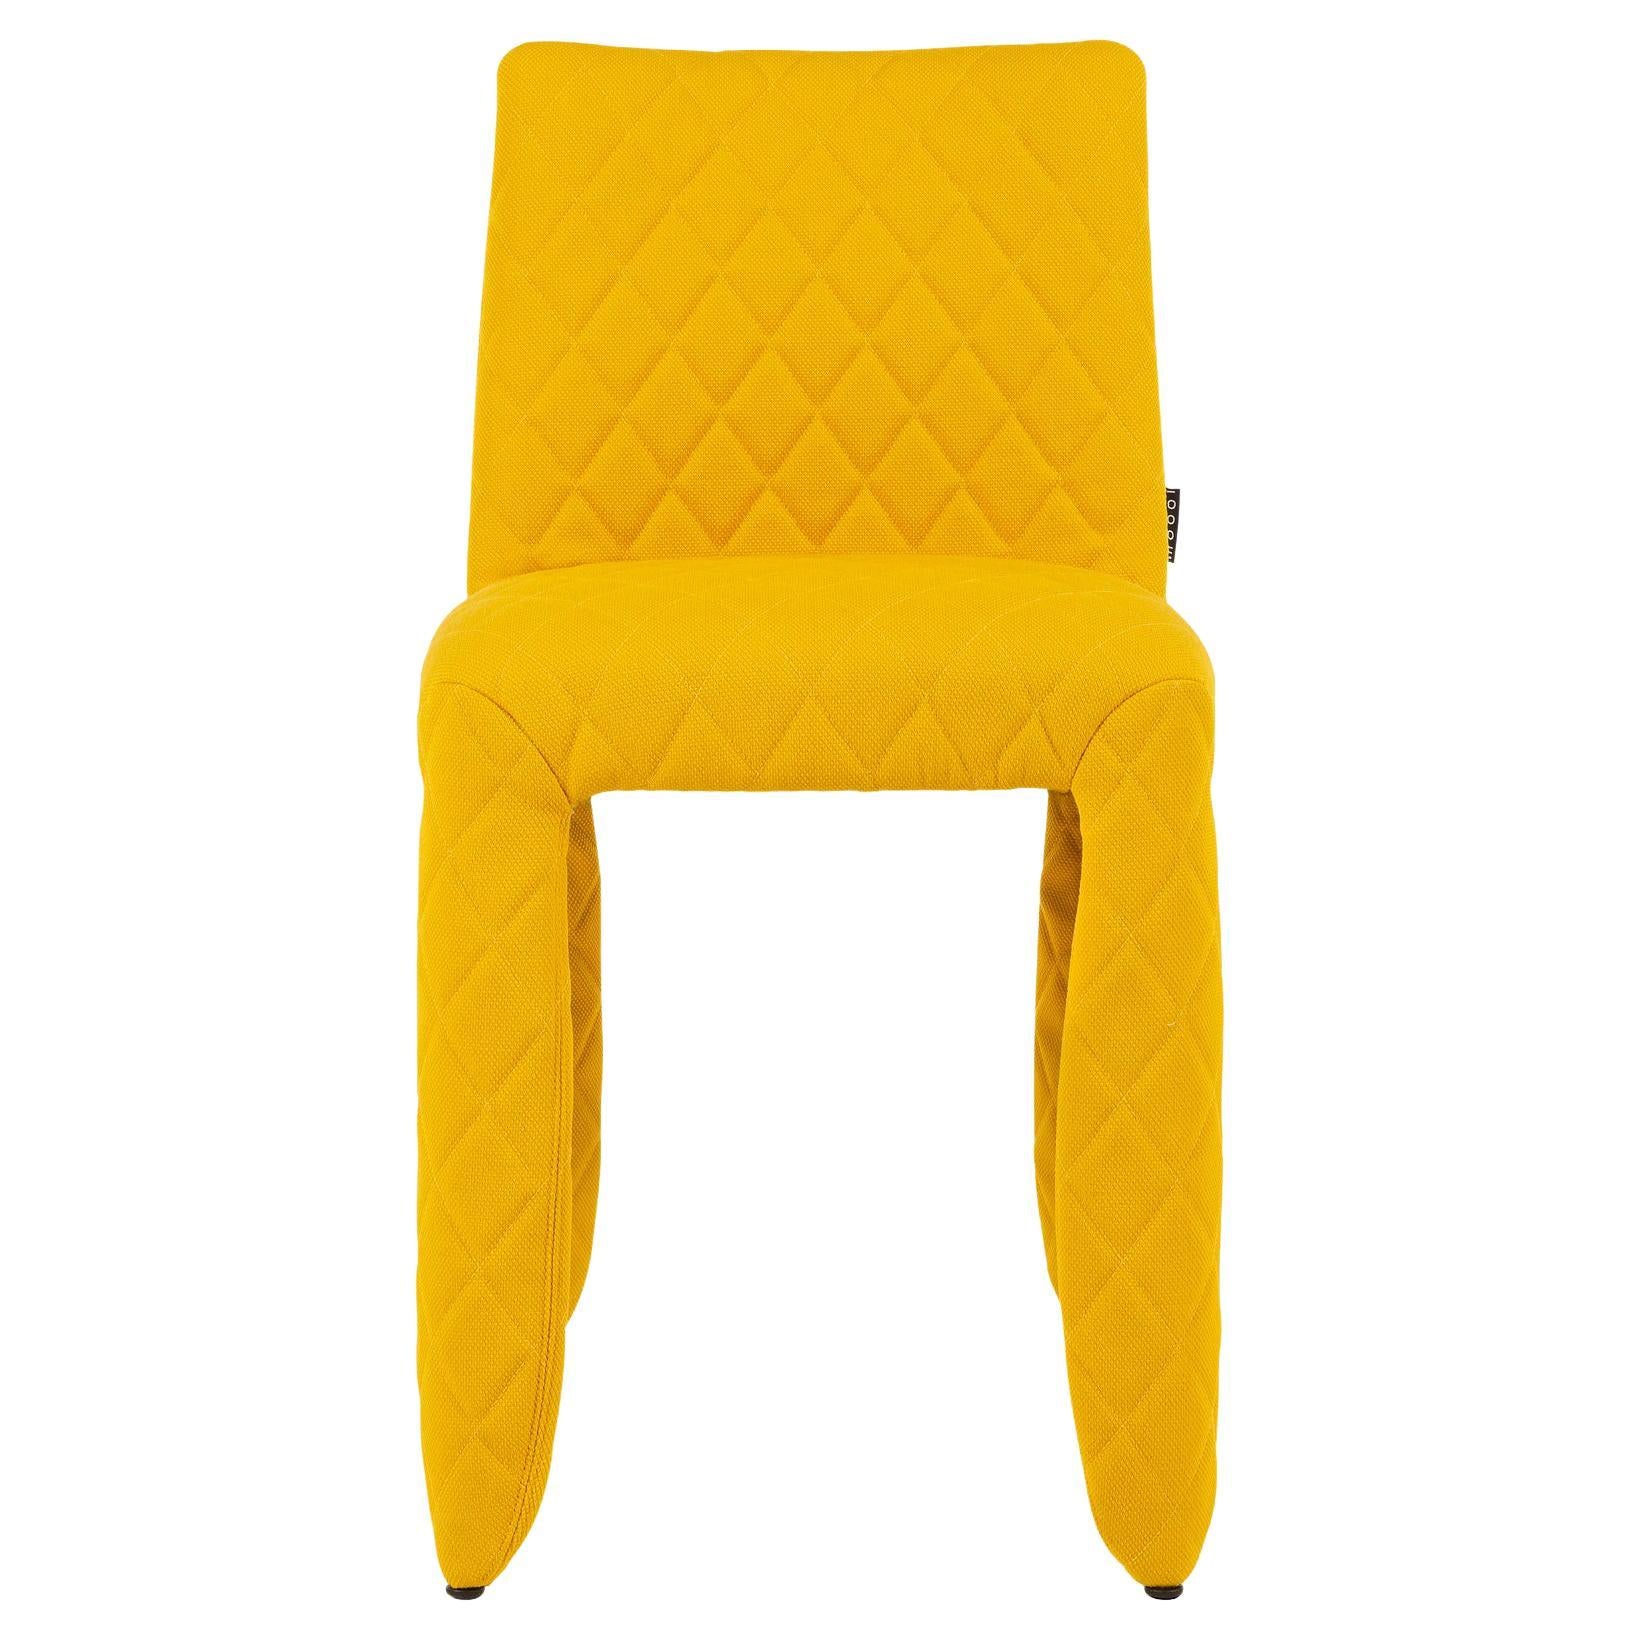 Moooi Monster Diamond Chair in Steelcut Trio 3, 446 Yellow Upholstery For Sale